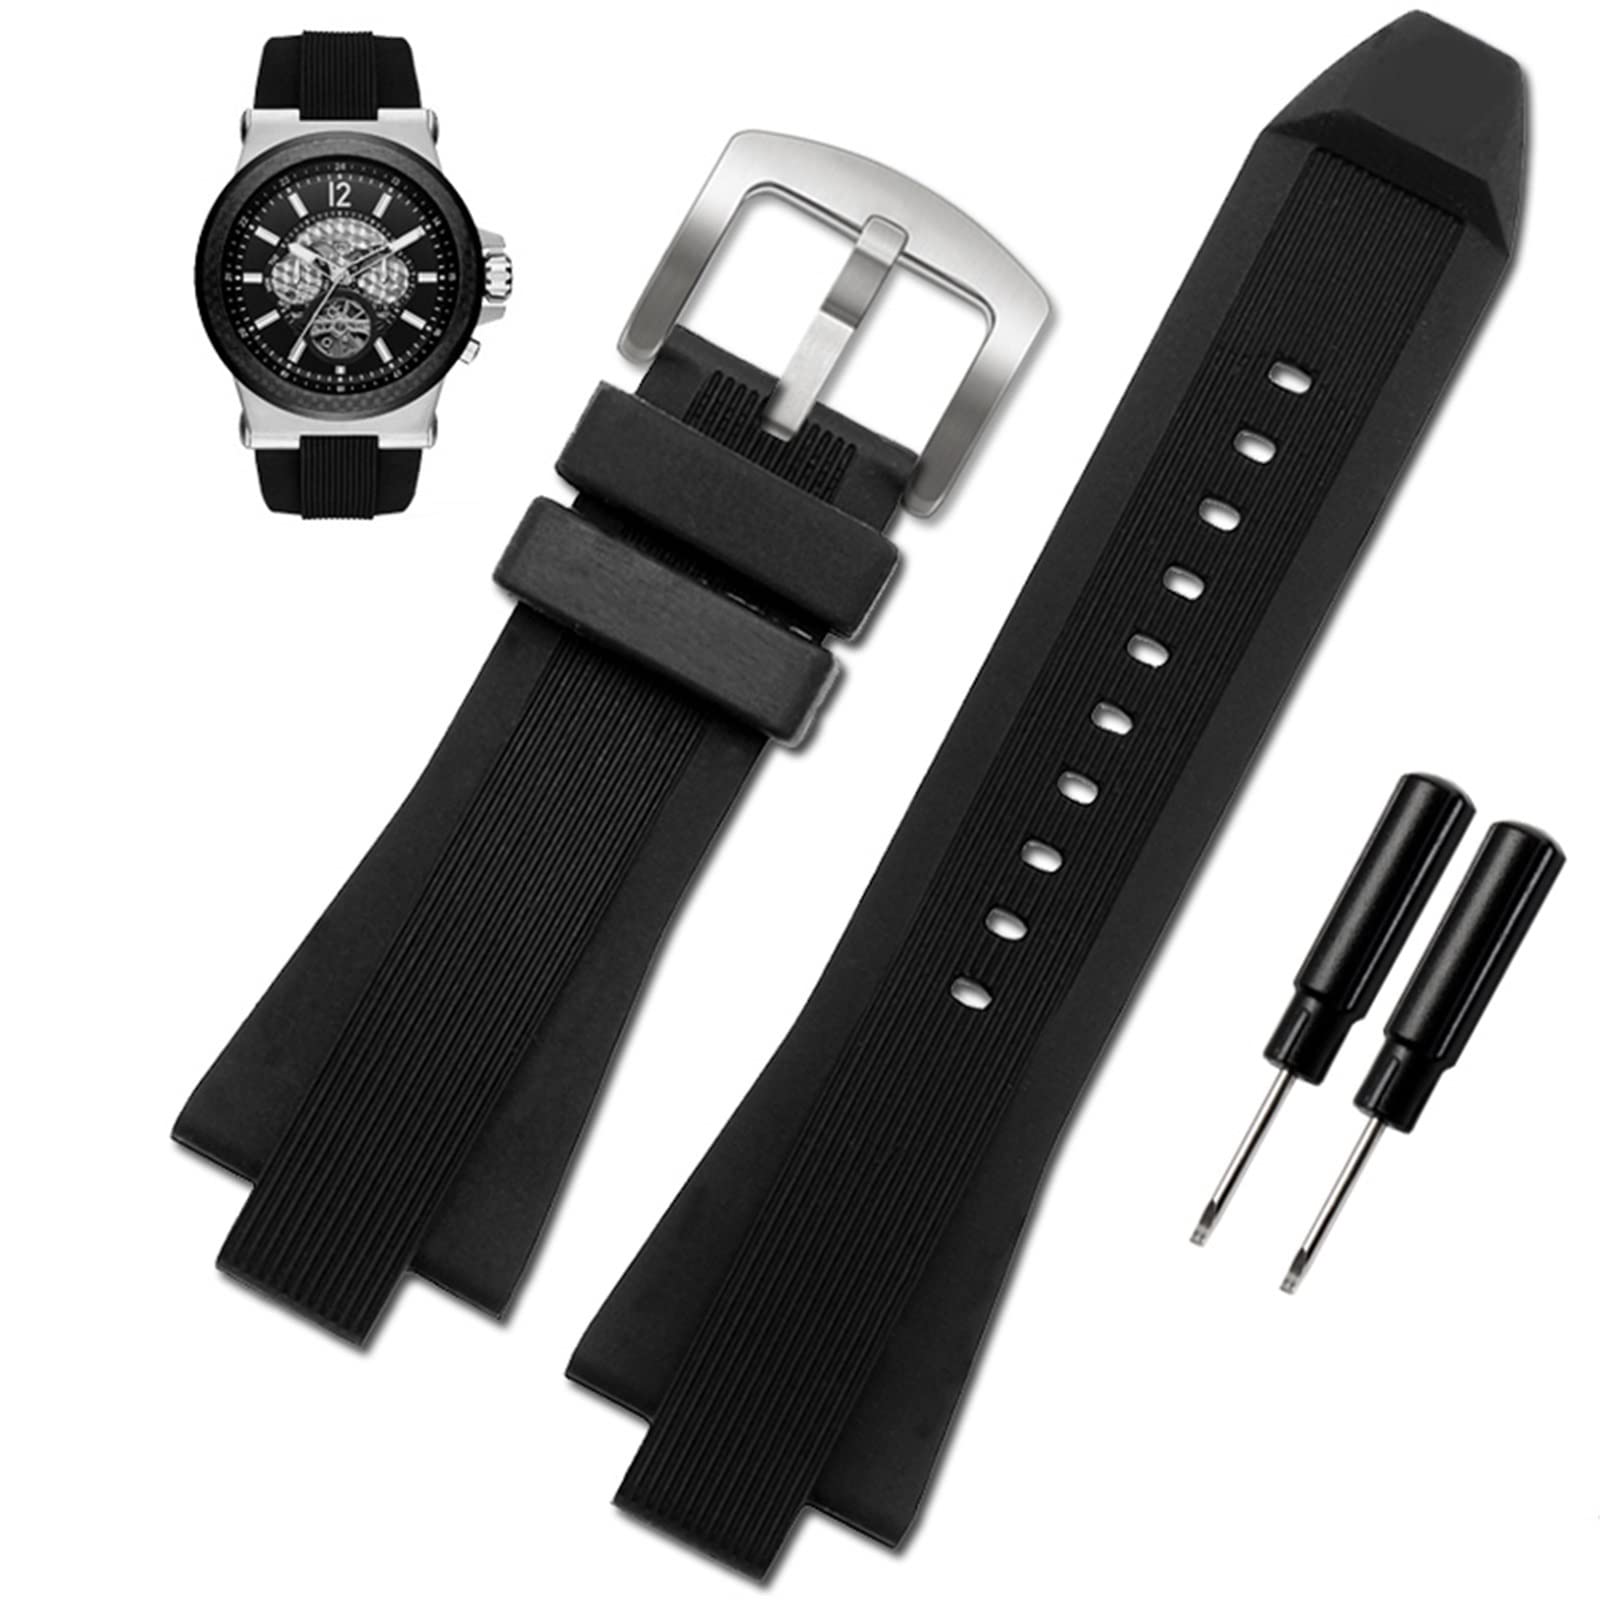 OSGC 29x13mm Silicone rubber Concave convex Watch Strap For Michael Kors MK9019 MK8295 MK8492 MK9020 MK9020 (Color : 26mm, Size : 29X13mm)